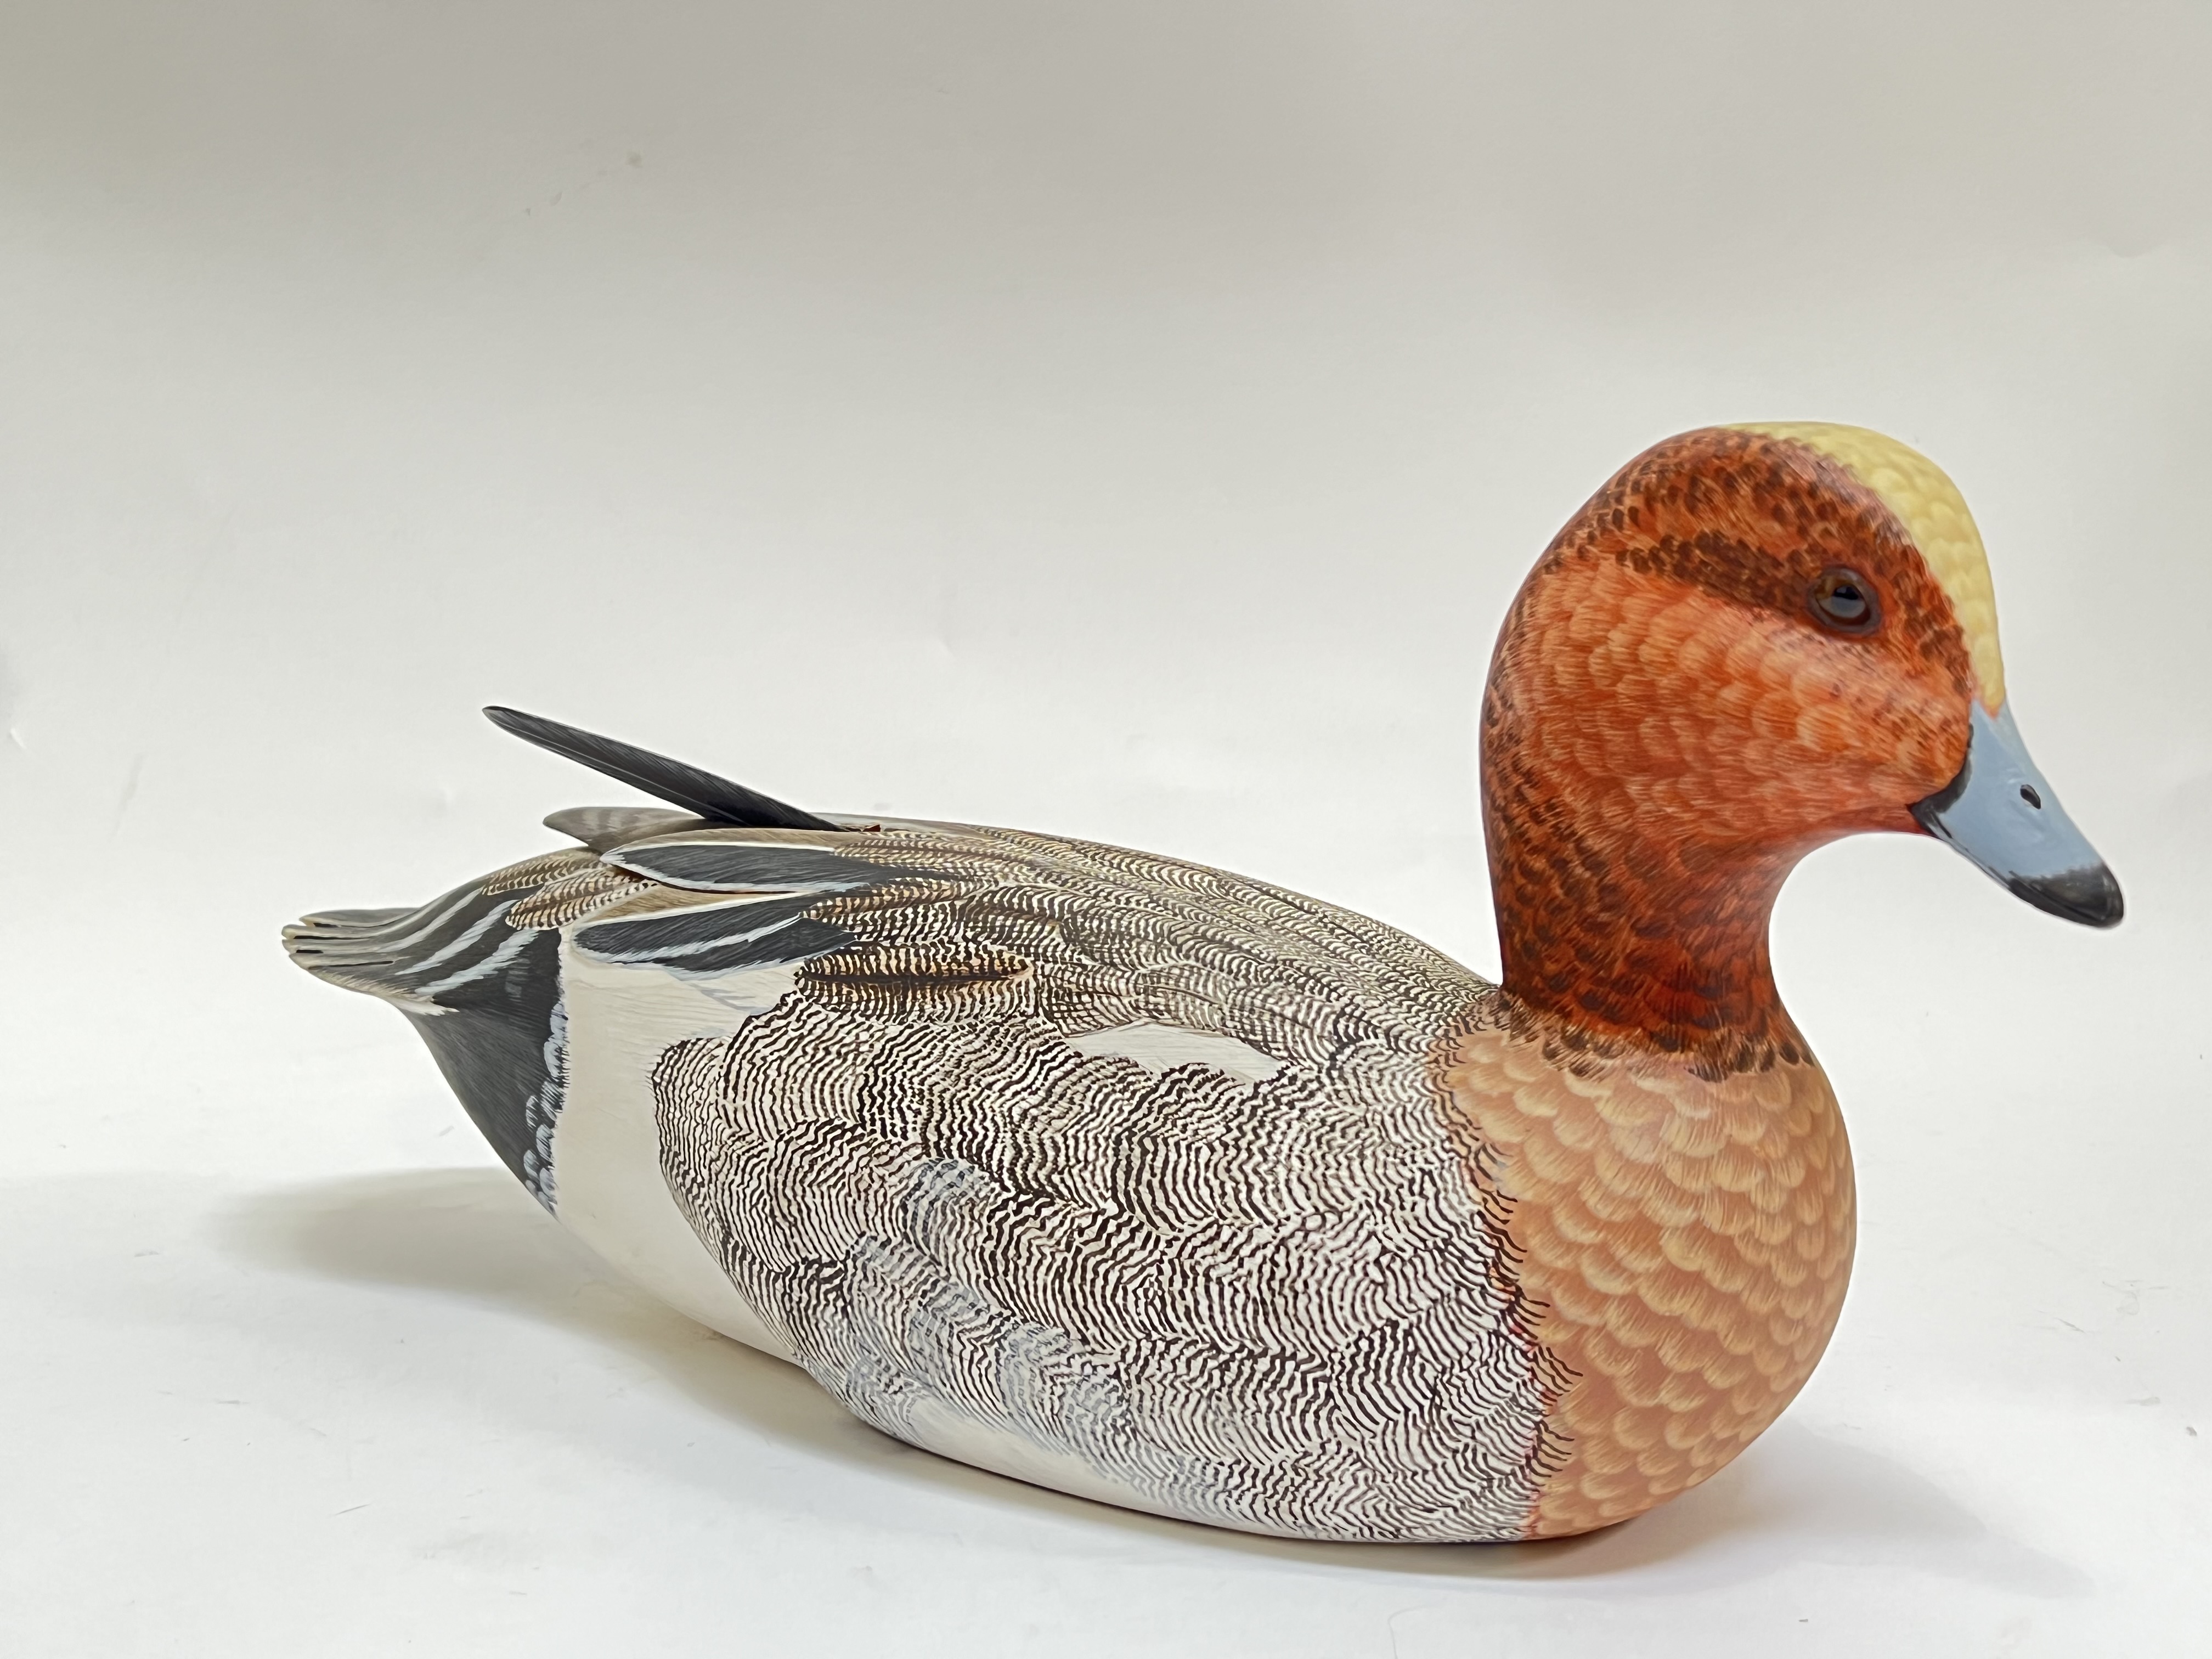 A fine quality hand-painted wooden duck decoy with glass eyes by Mike Wood (h- 18cm, w- 36cm) - Image 2 of 4